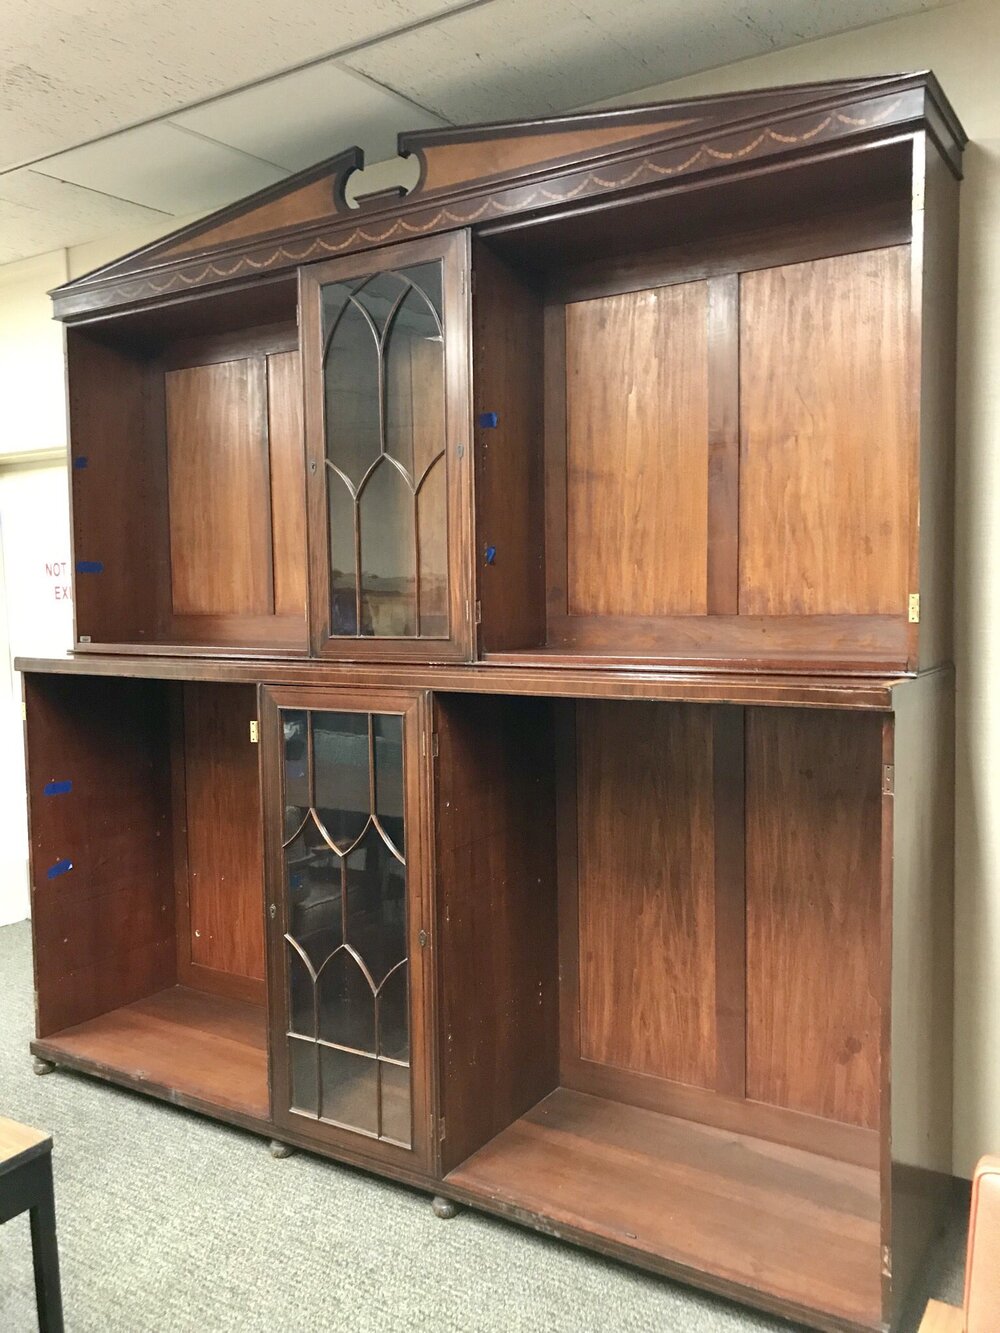 The Houdini bookcase without the glass doors